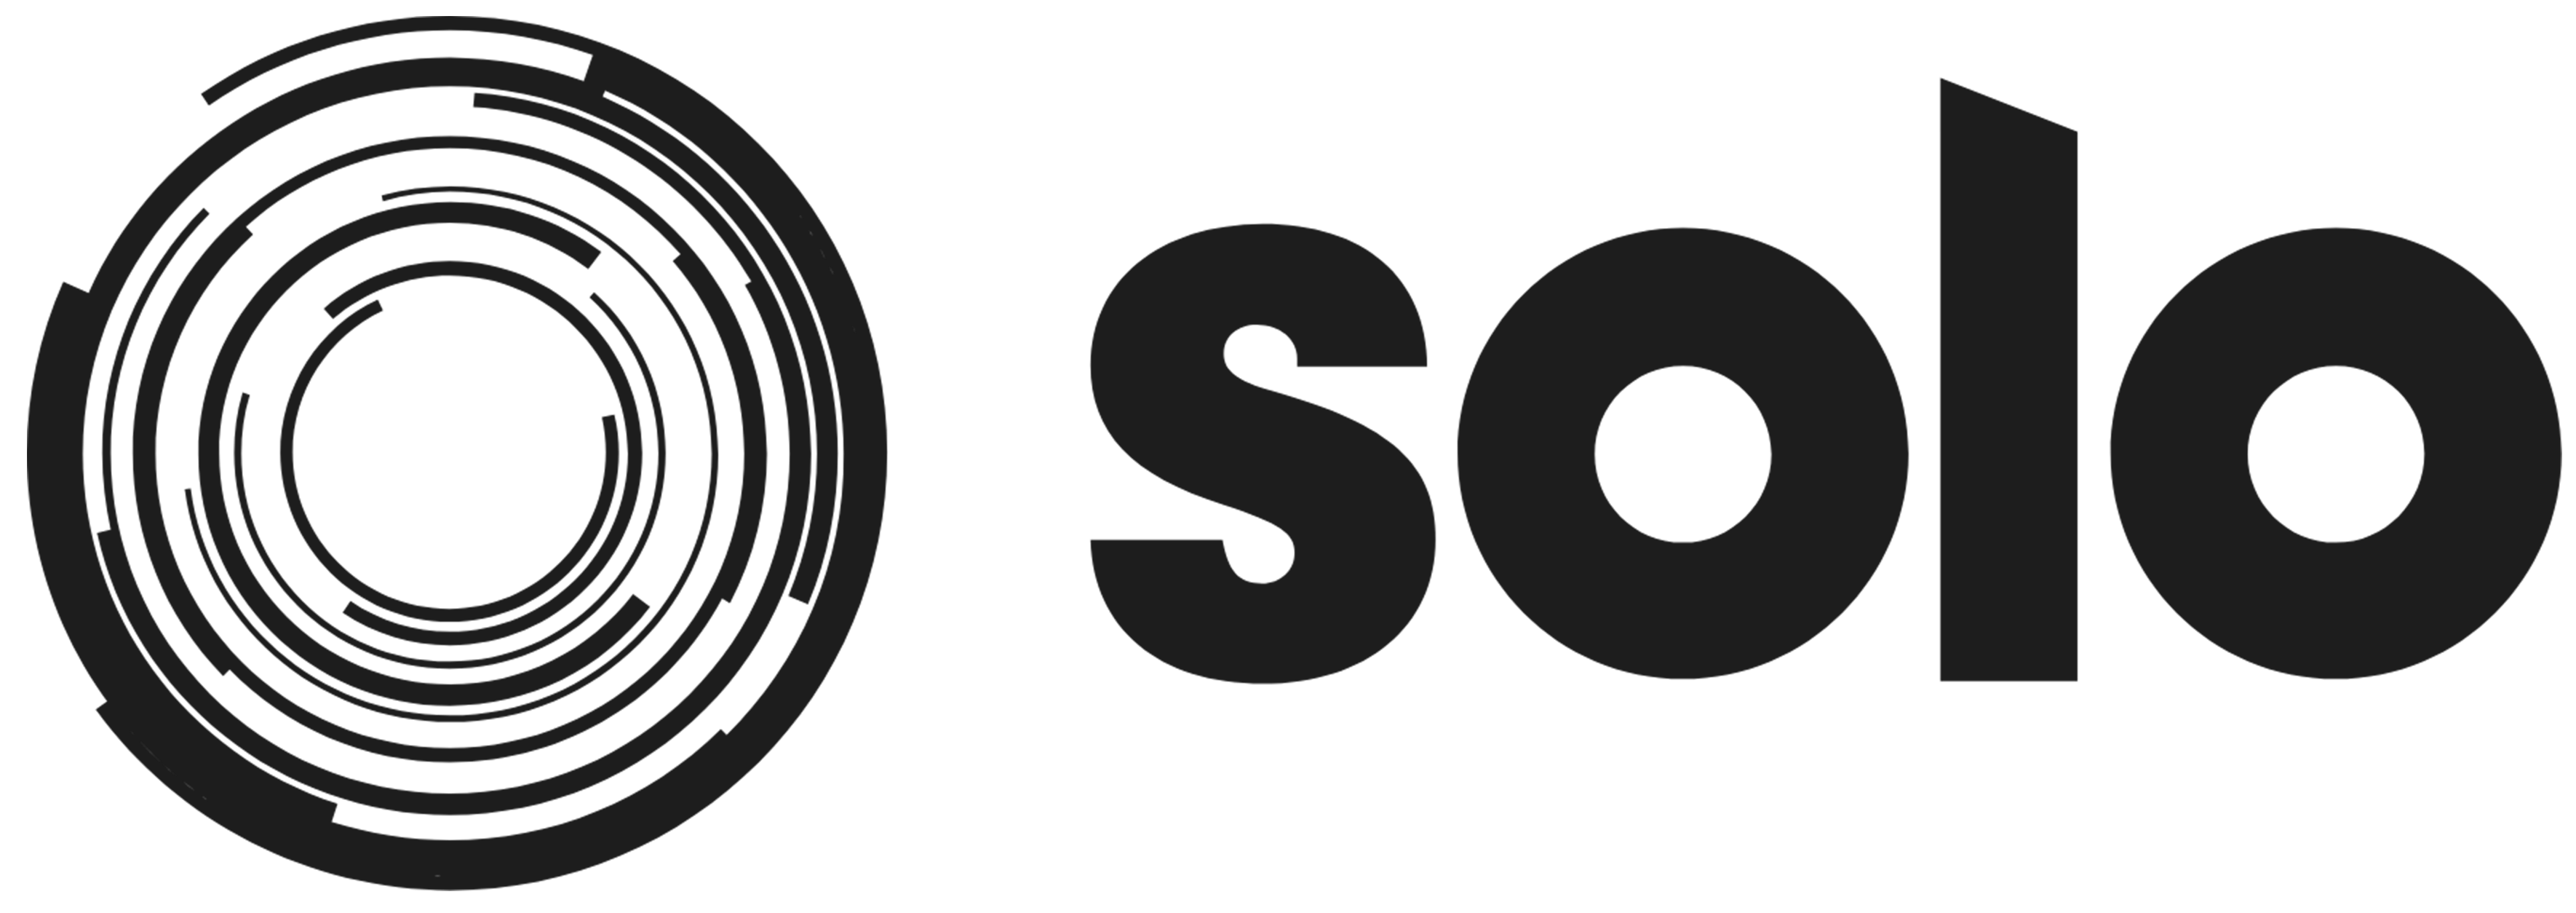 solo-logo.png